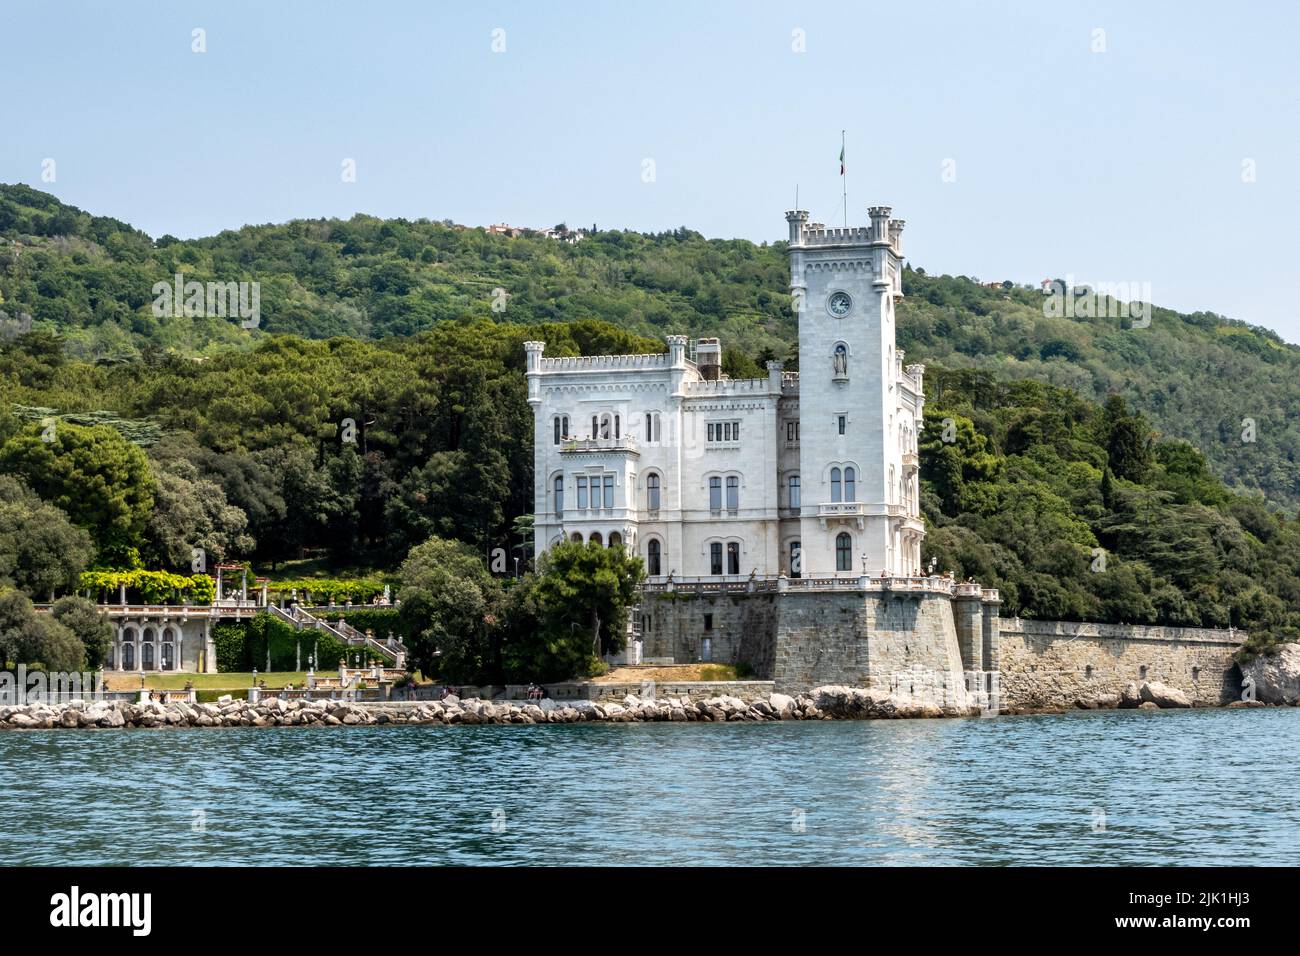 Trieste,Italy, 17 July 2022.  Miramare Castle overlooking the Adriatic Sea in Trieste.  It was built from 1856 to 1860 for Austrian Archduke Ferdinand Stock Photo